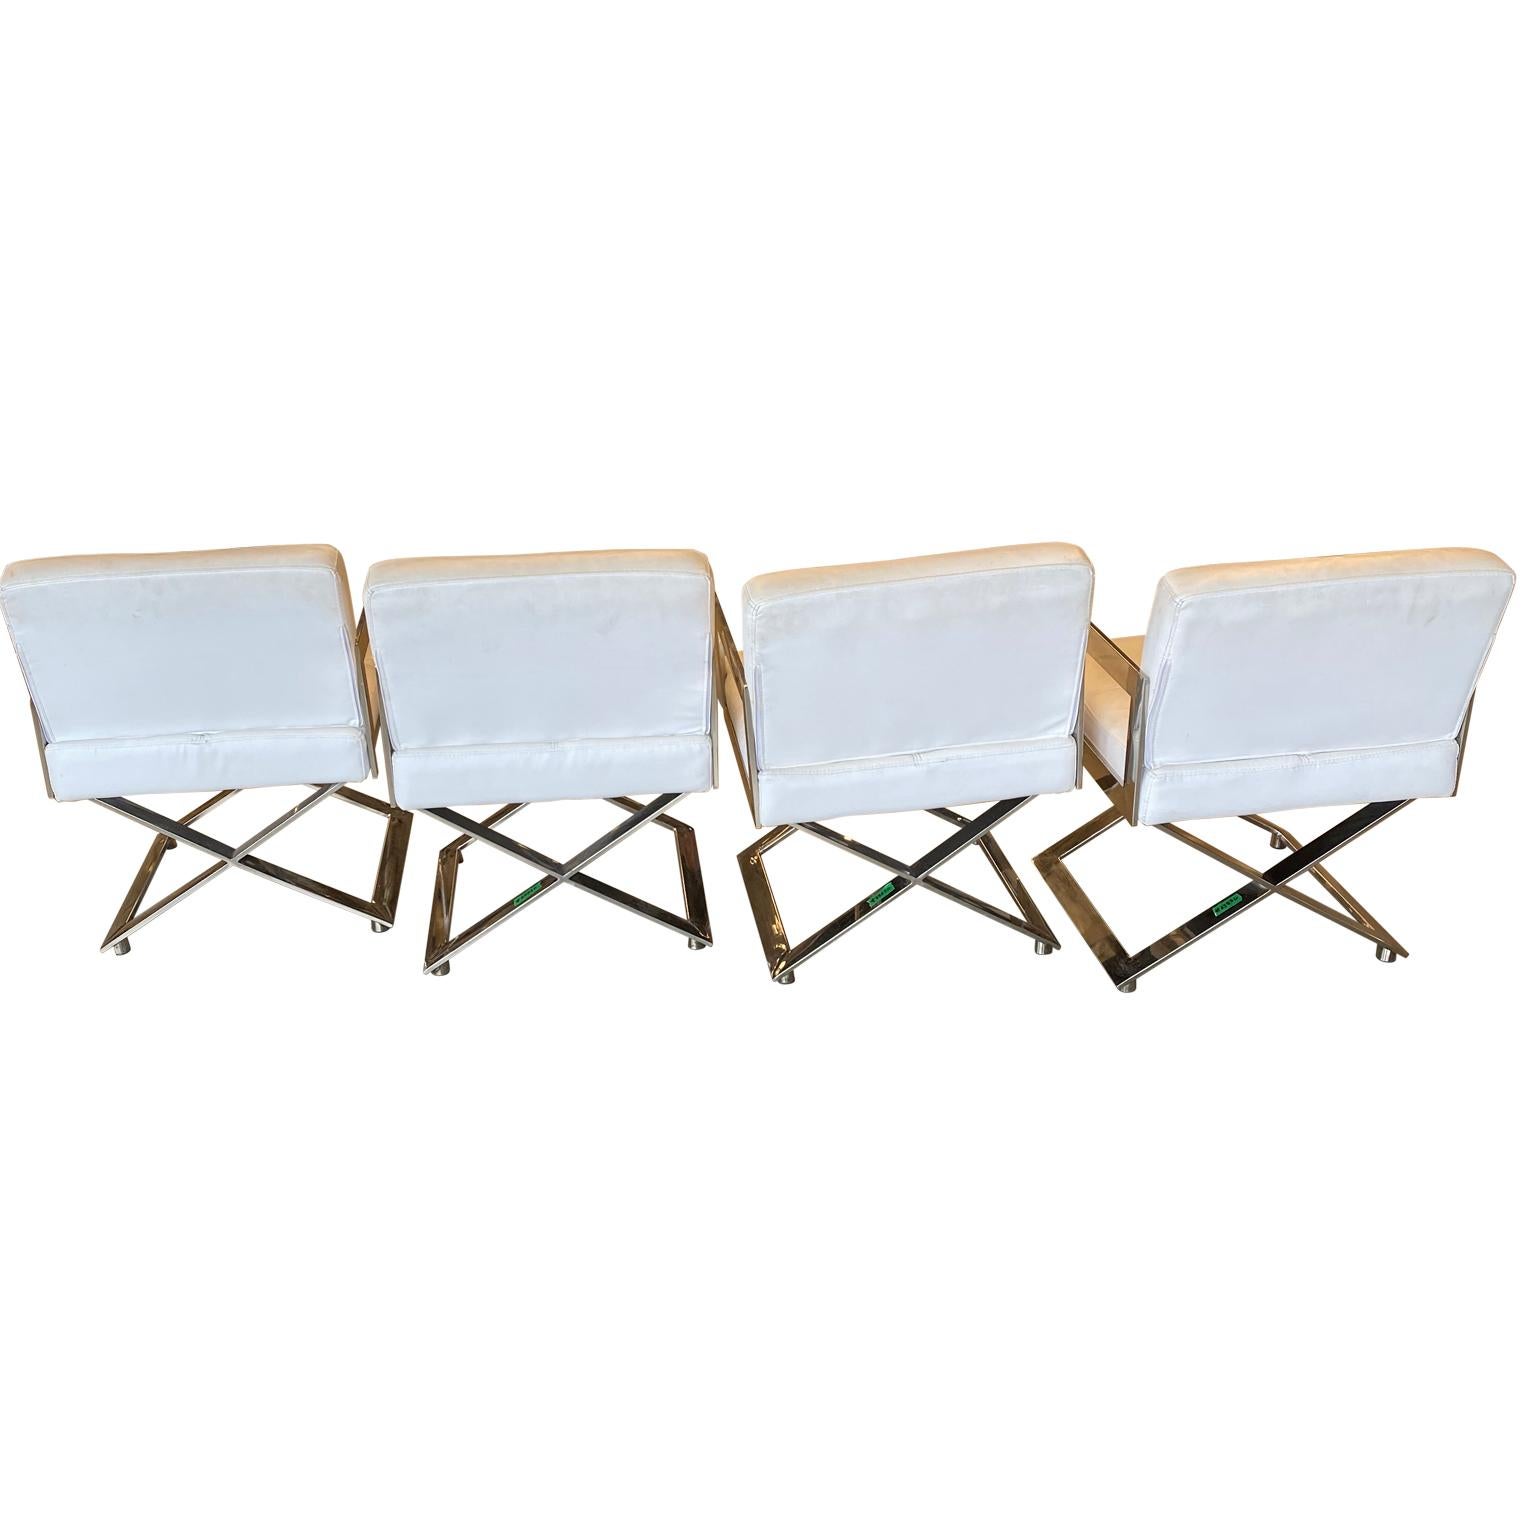 8 Milo Baughman Mid-Century Modern Dining Room Armchairs, Chrome & White Fabric In Good Condition For Sale In Haddonfield, NJ